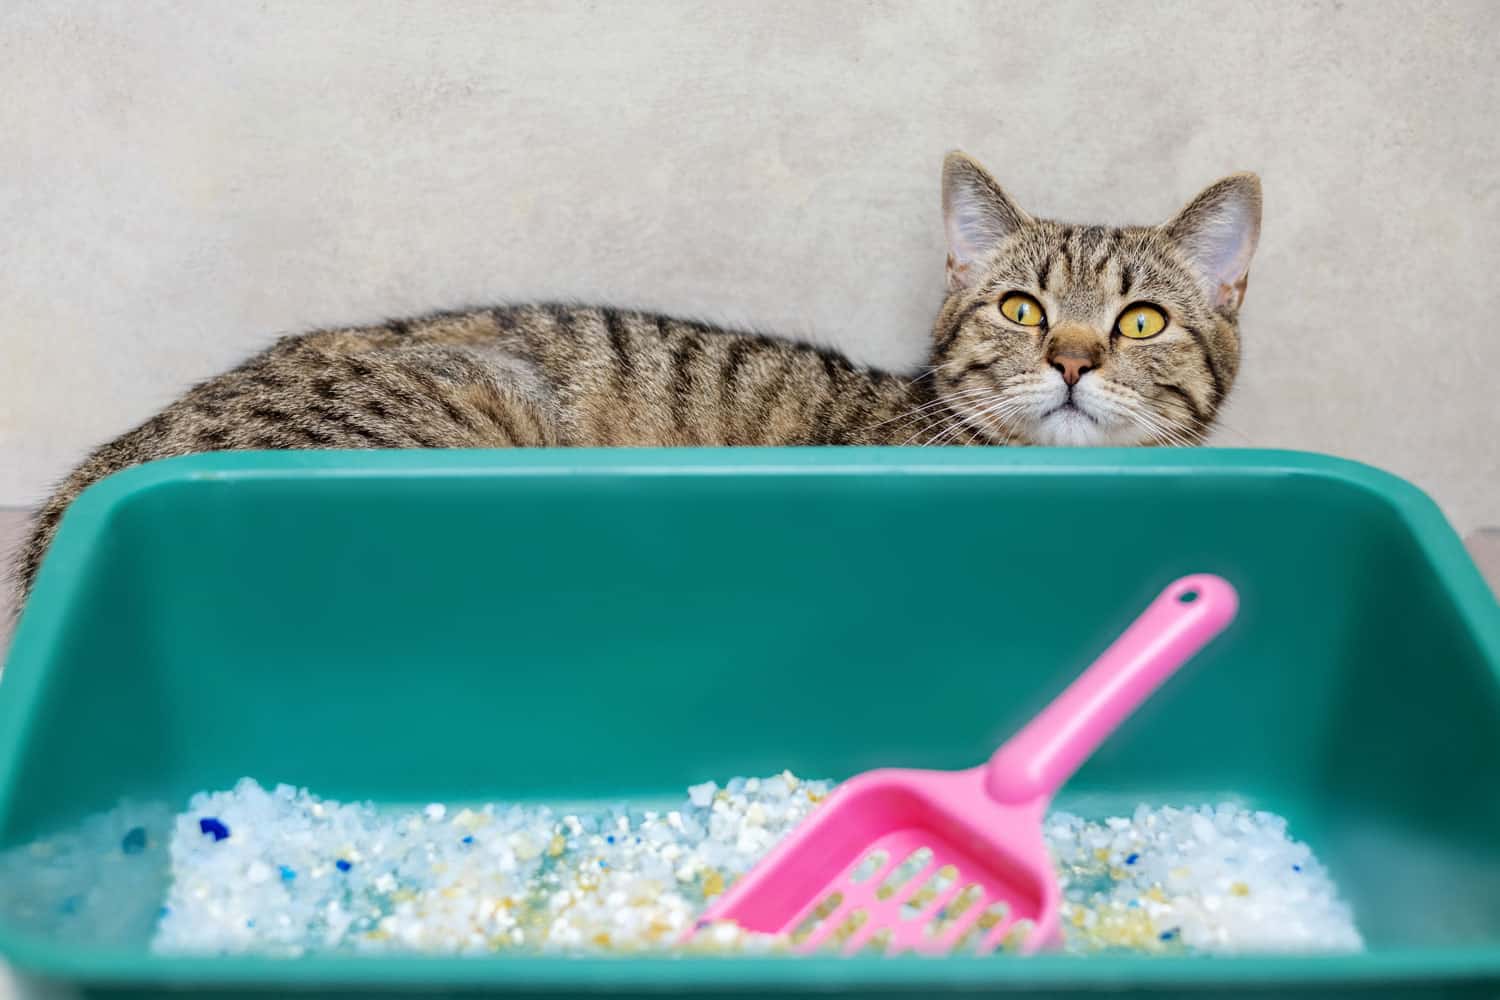 cat litter in bathroom and angry upset tabby cat sitting beside.litter with silica crystal,dirty with pee particles in box.domestic pet is angry education process.pink shovel spatula accessories
